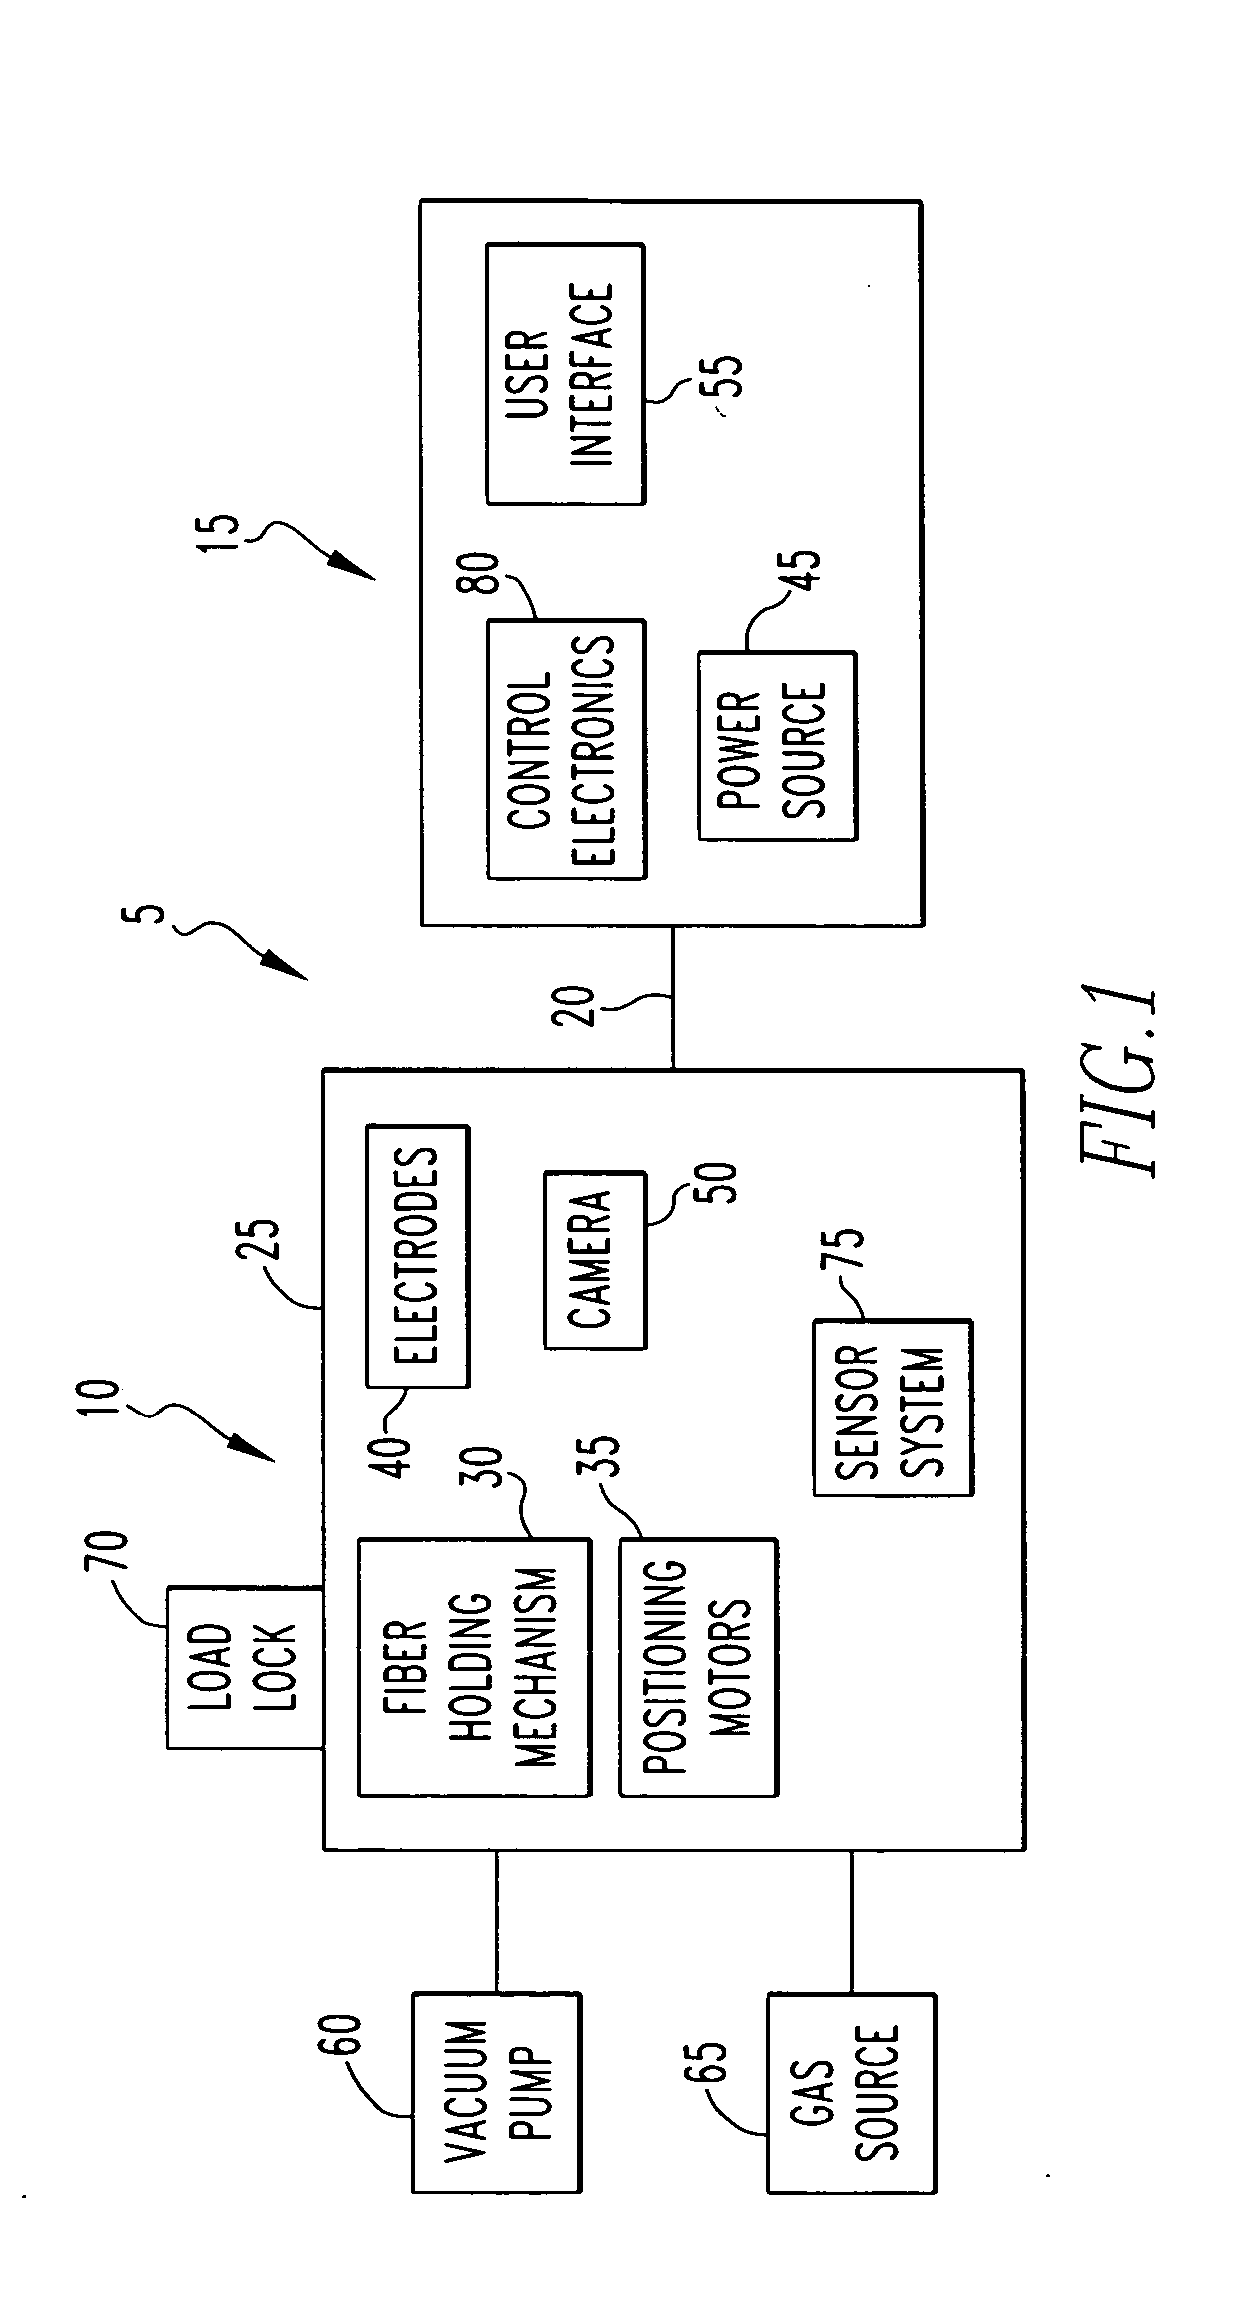 Method and apparatus for fusion splicing optical fibers